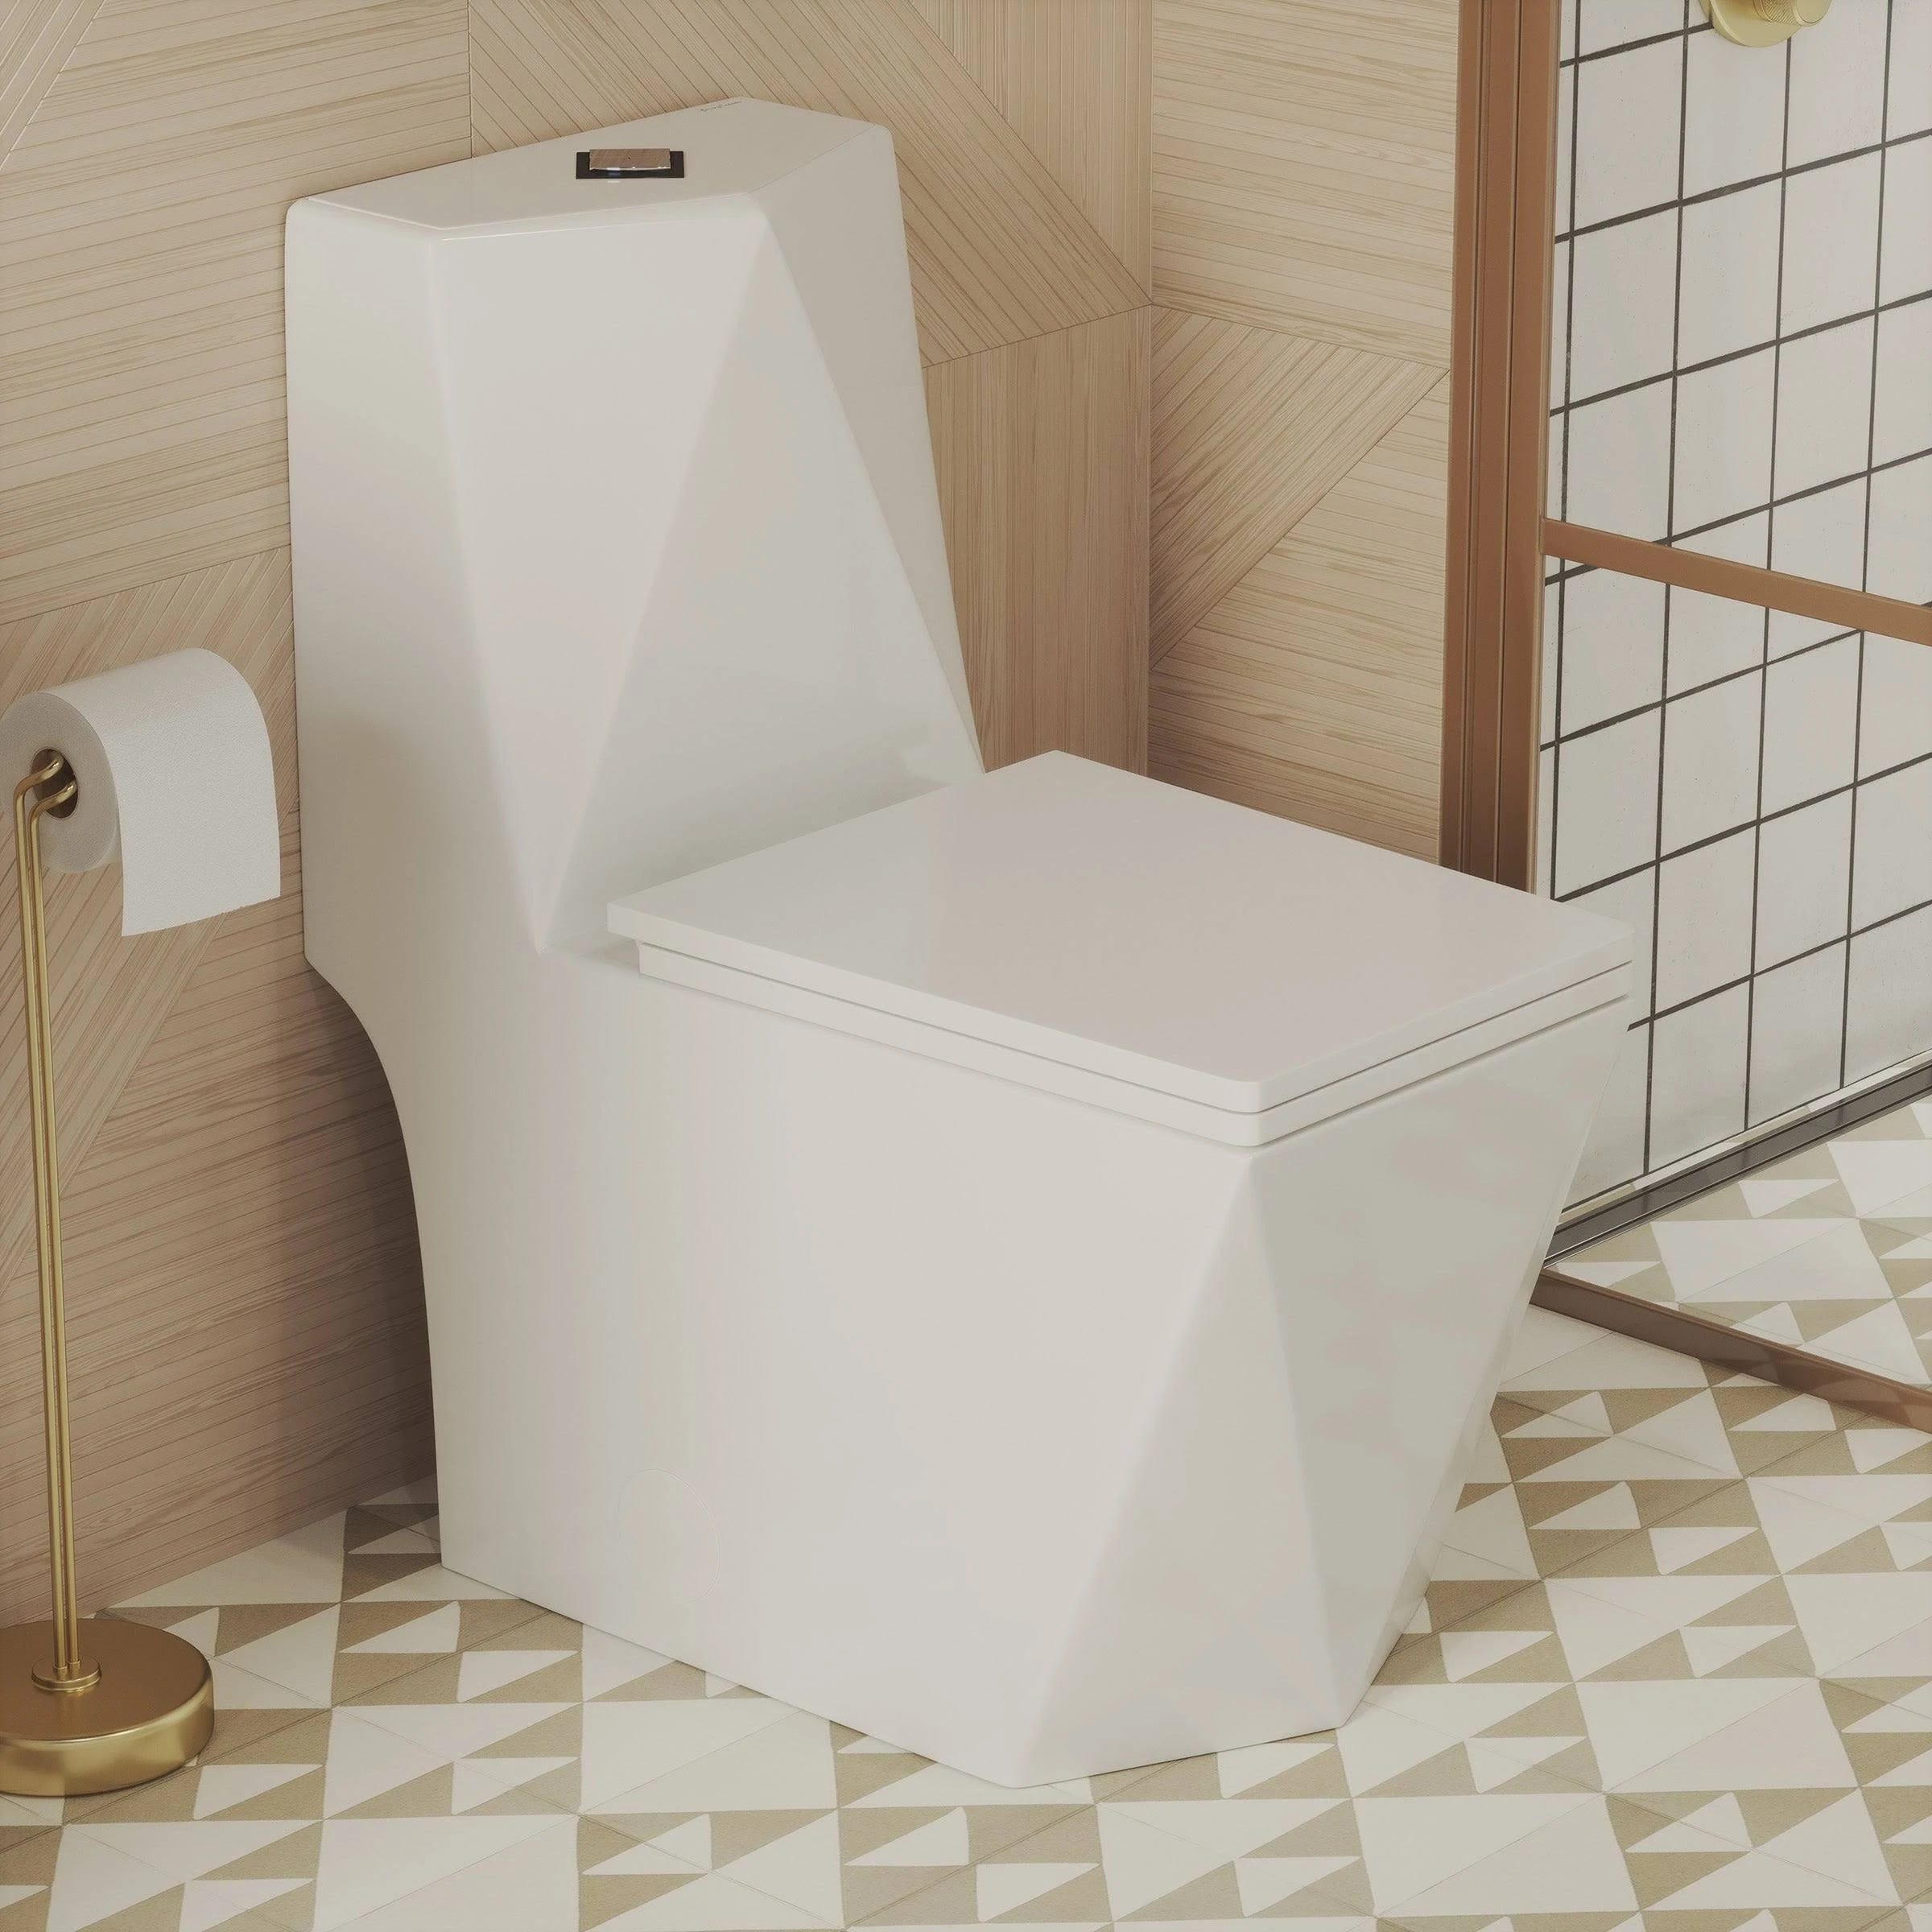 Square One-Piece Dual-Flush Toilet with High-Performance Vortex | Image